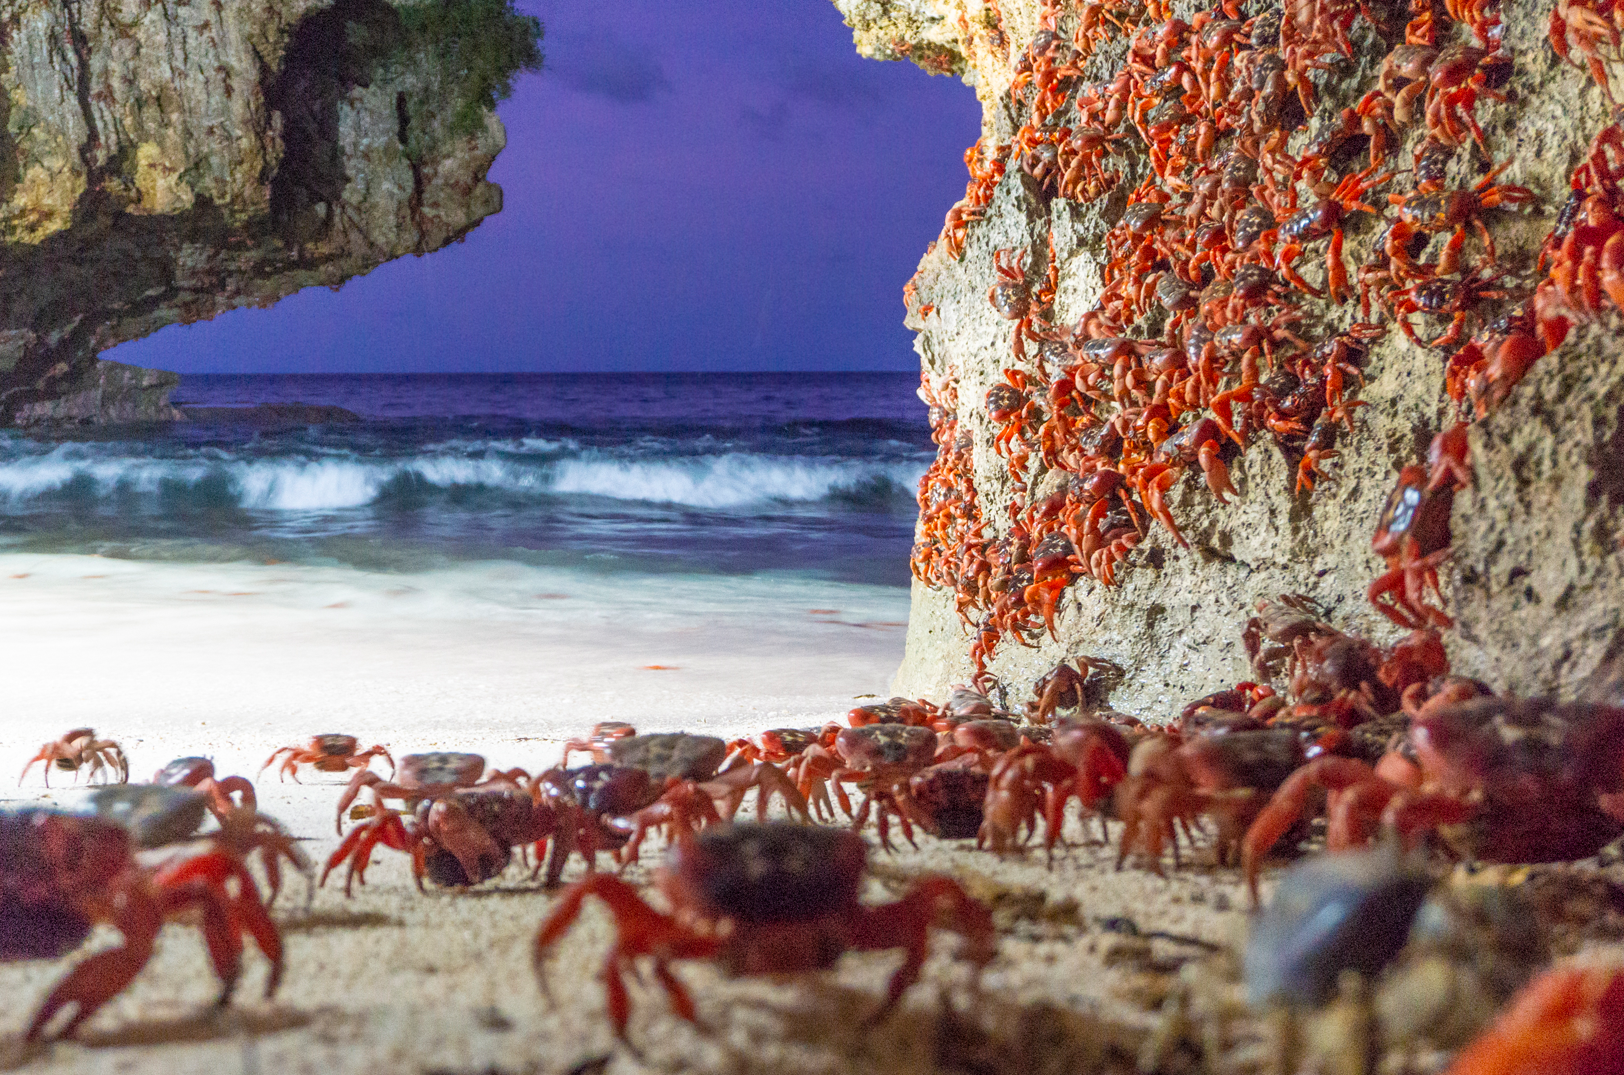 red crabs on christmas island beach during wet season red crab migration at night near Swell Lodge